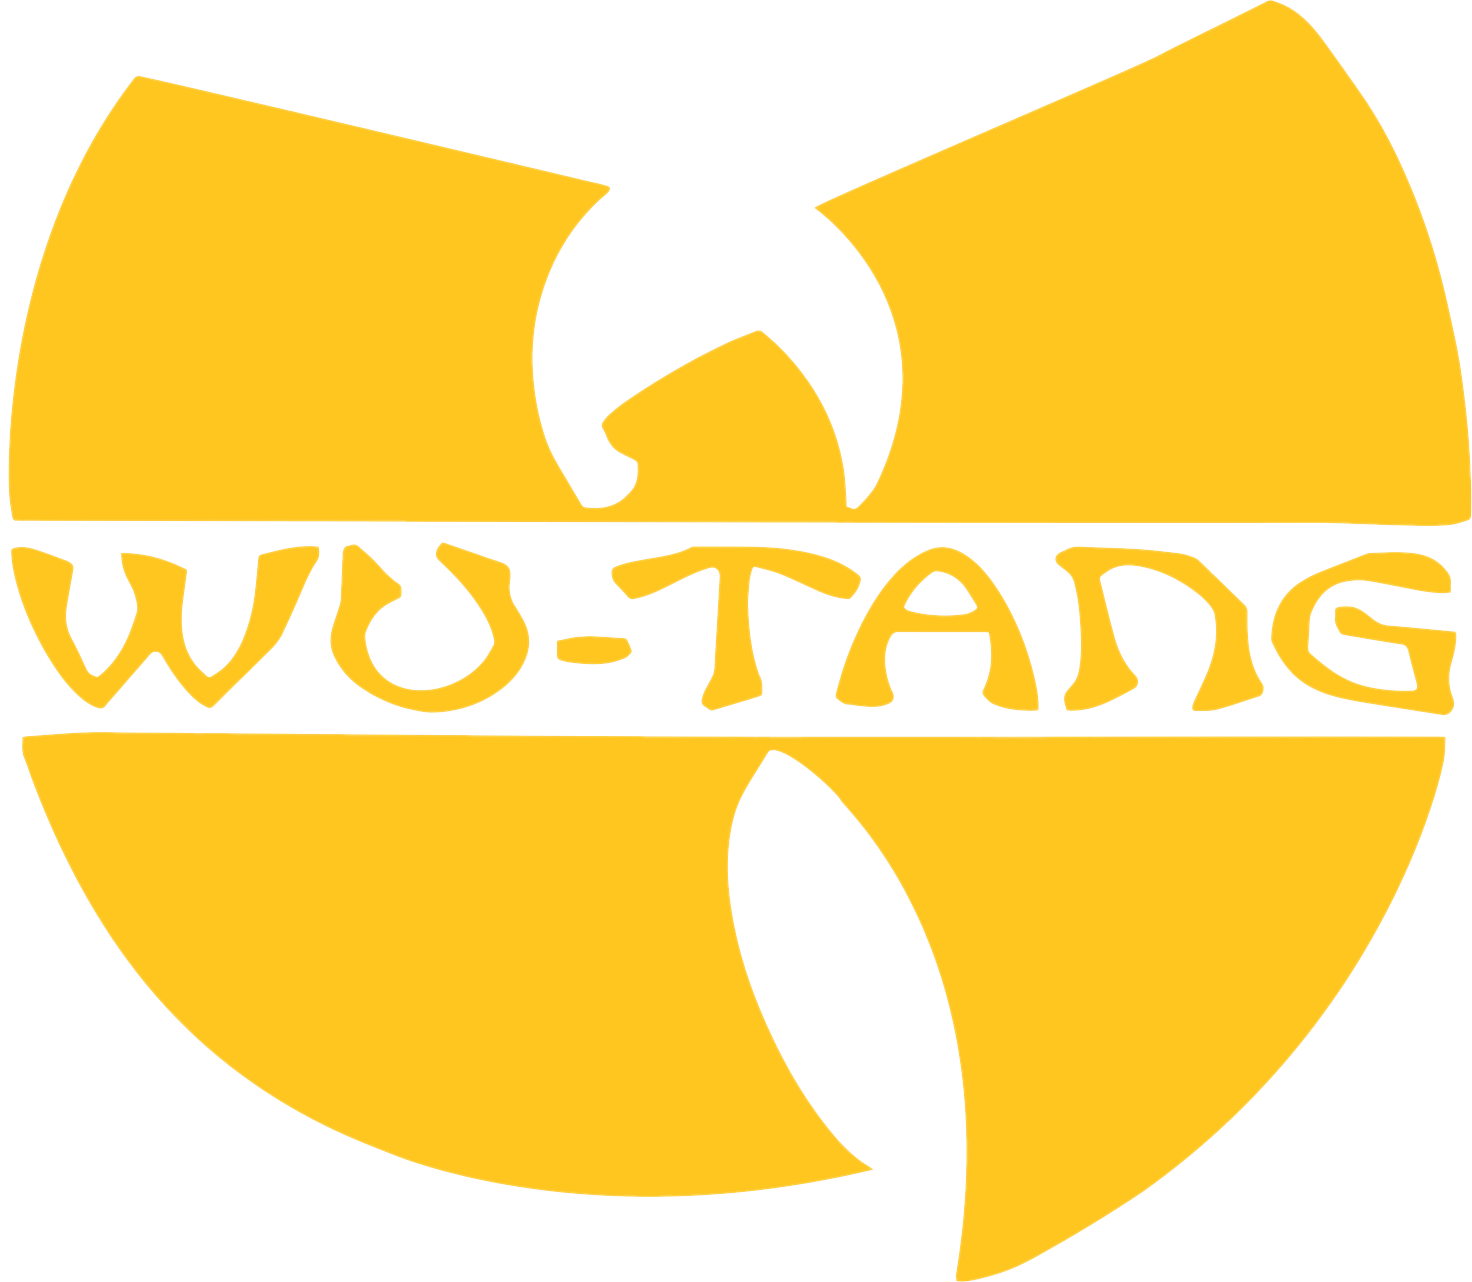 Like Wu-Tang, I am for The Children